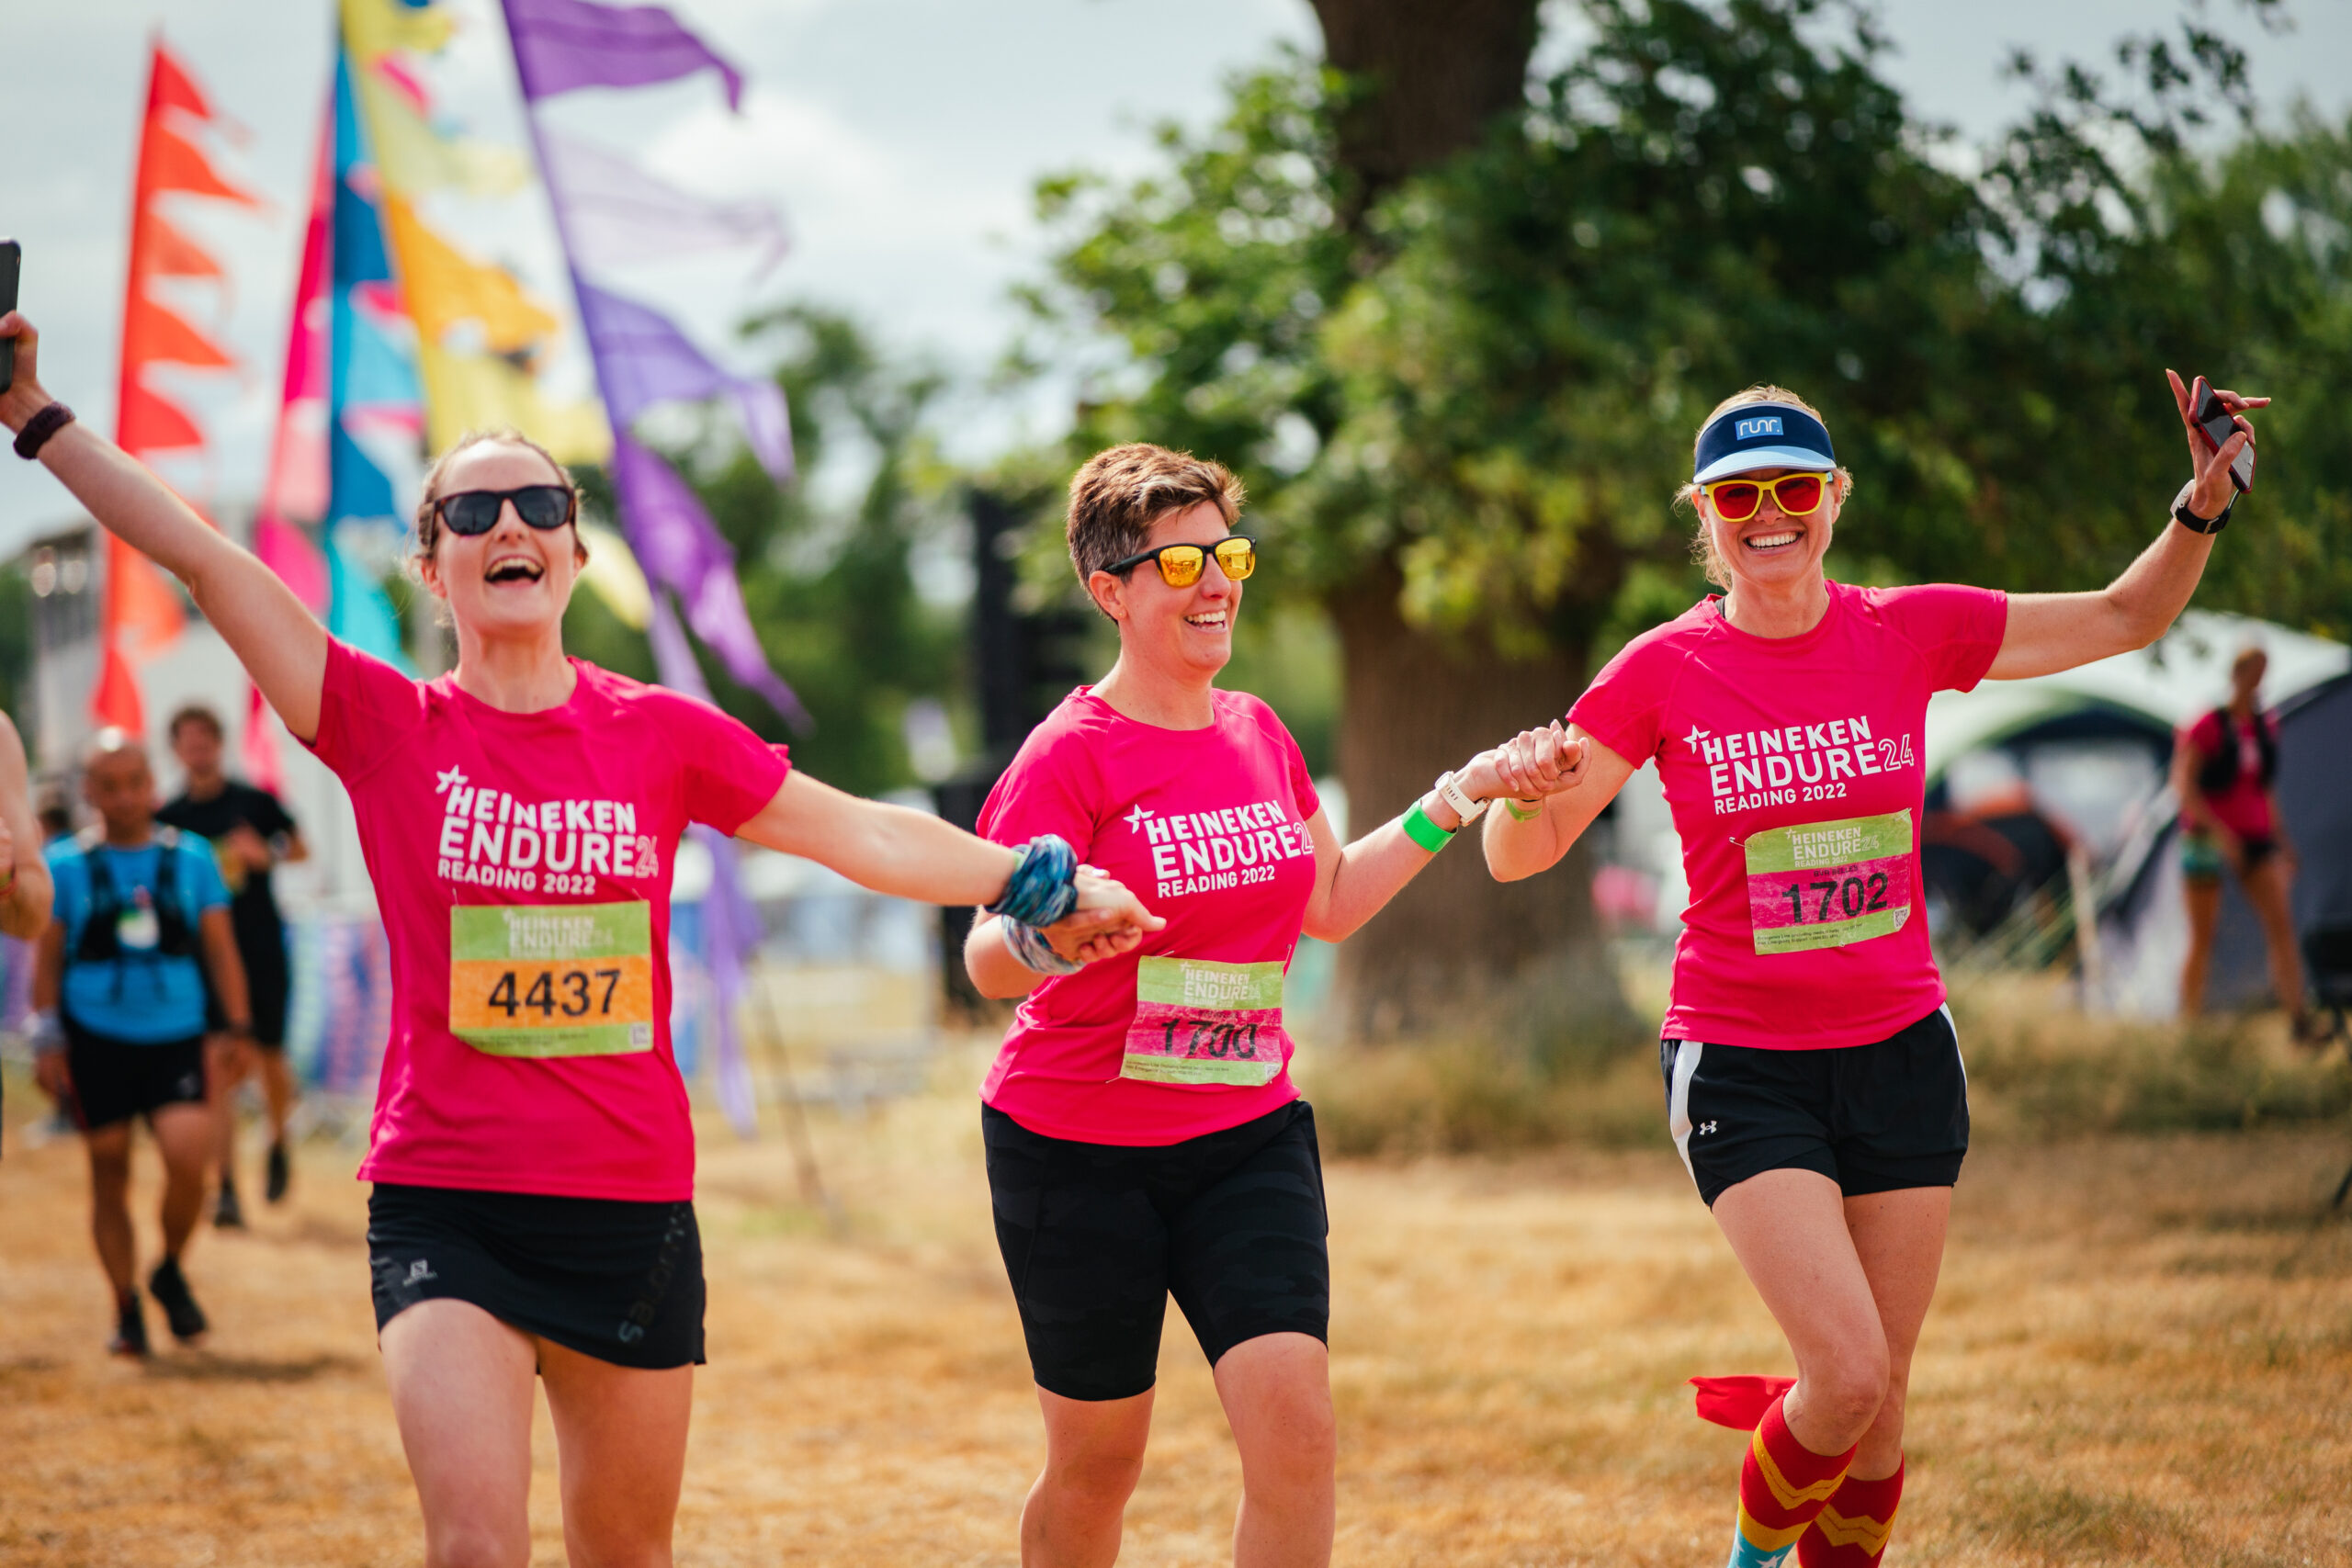 3 ladies celebrate success at a 24 hour relay